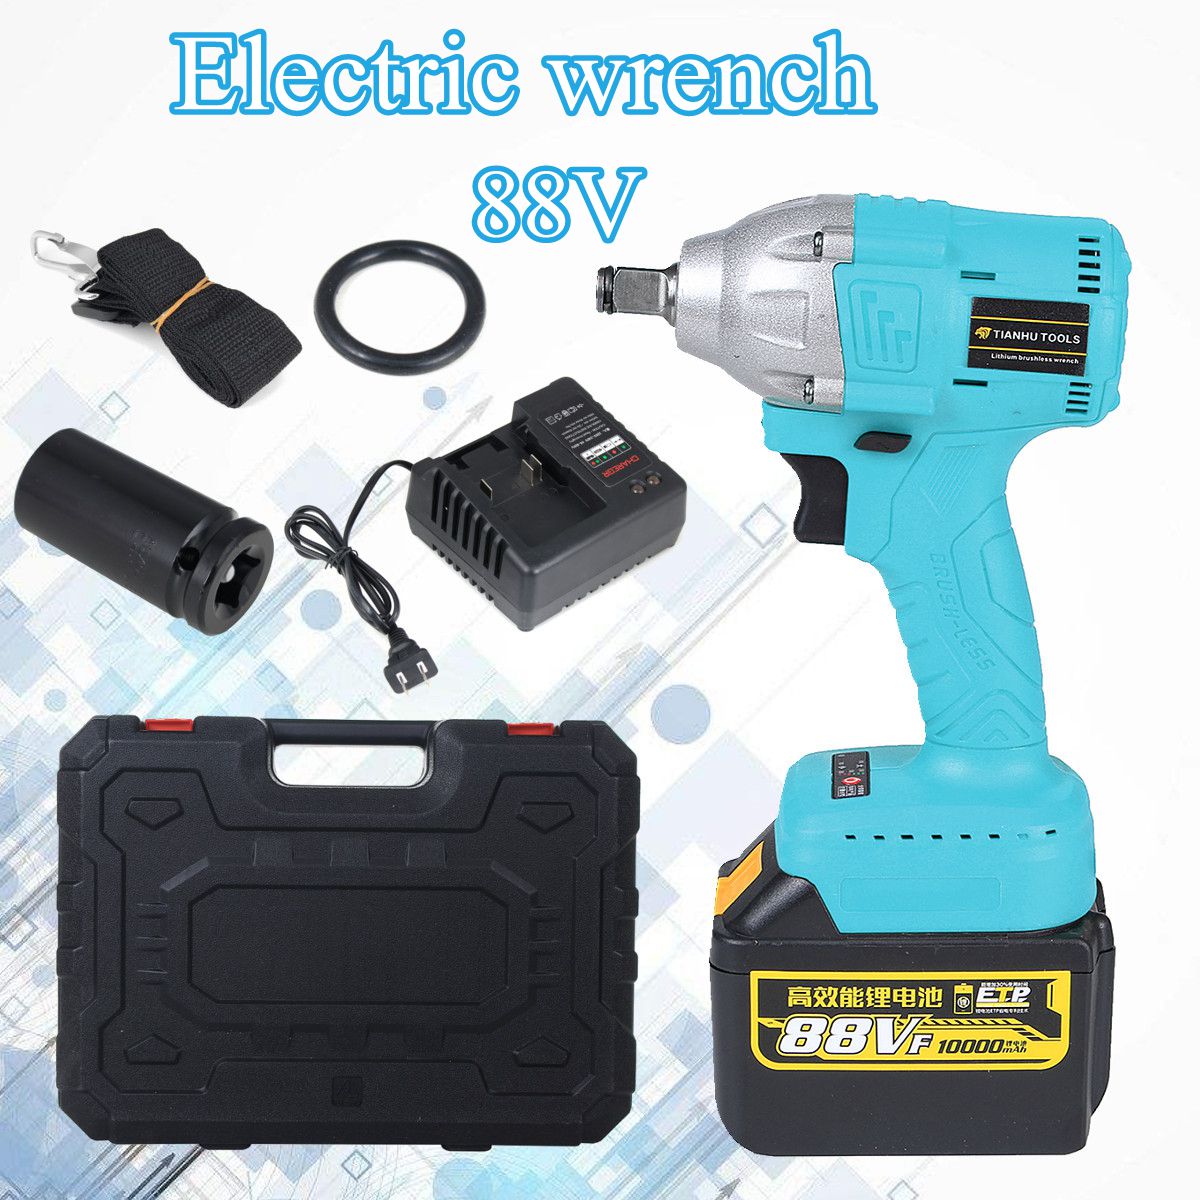 88V-10000mAH-110V-220V-Electric-Wrench-Lithium-Ion-Drive-Cordless-Power-Wrench-320Nm-Torque-1262268-6